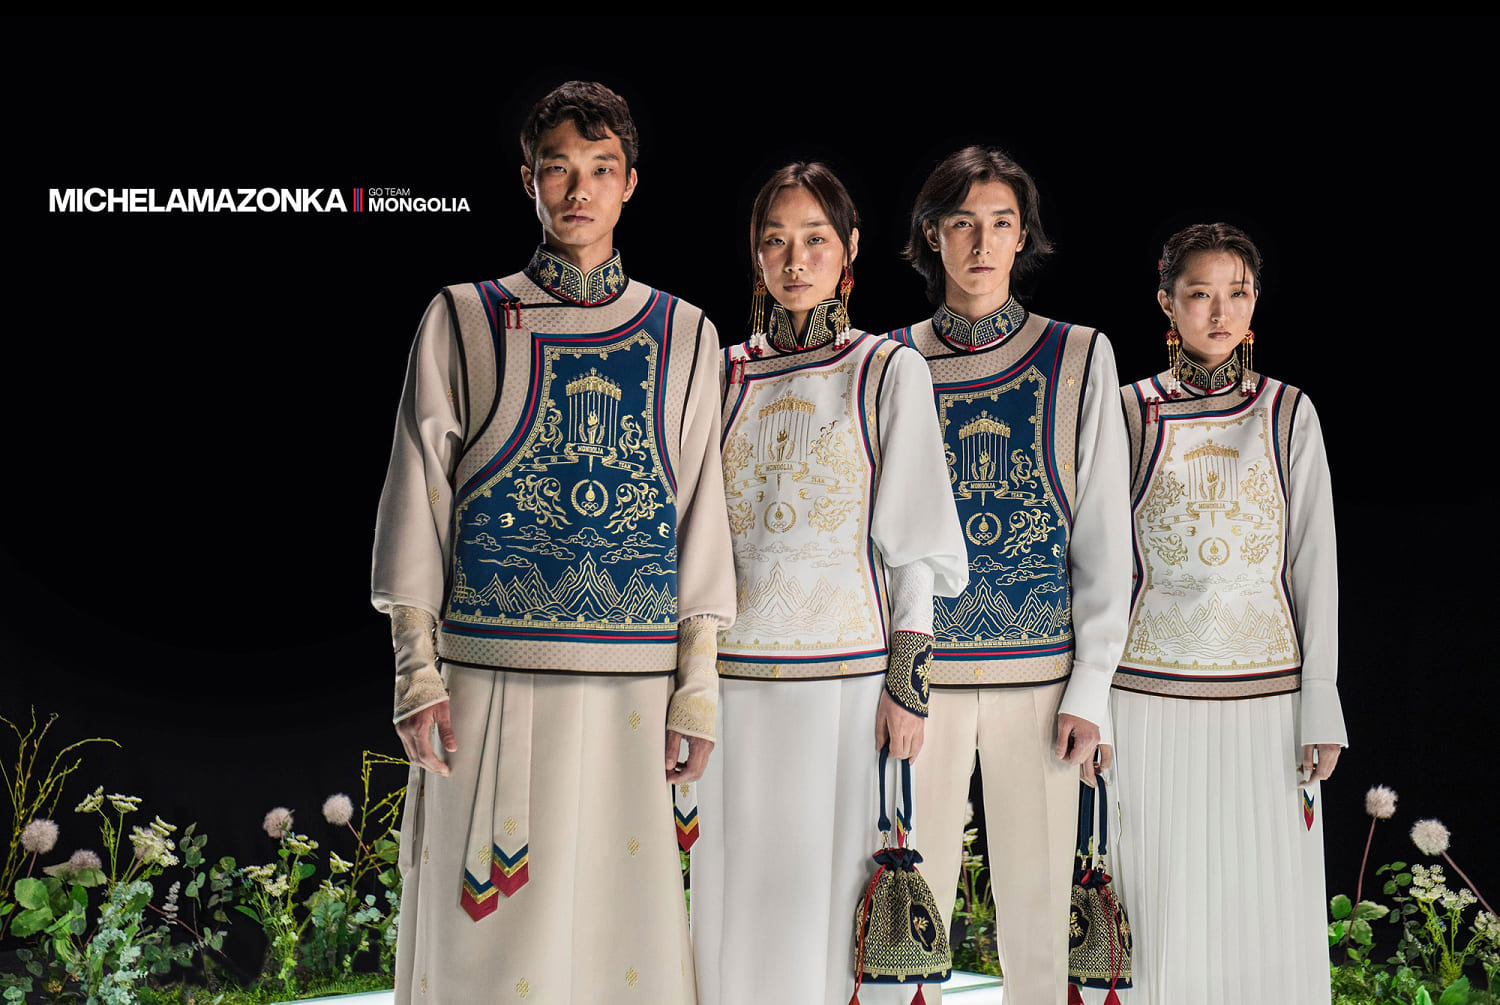 Team Mongolia can already take a victory lap for their Olympic uniforms